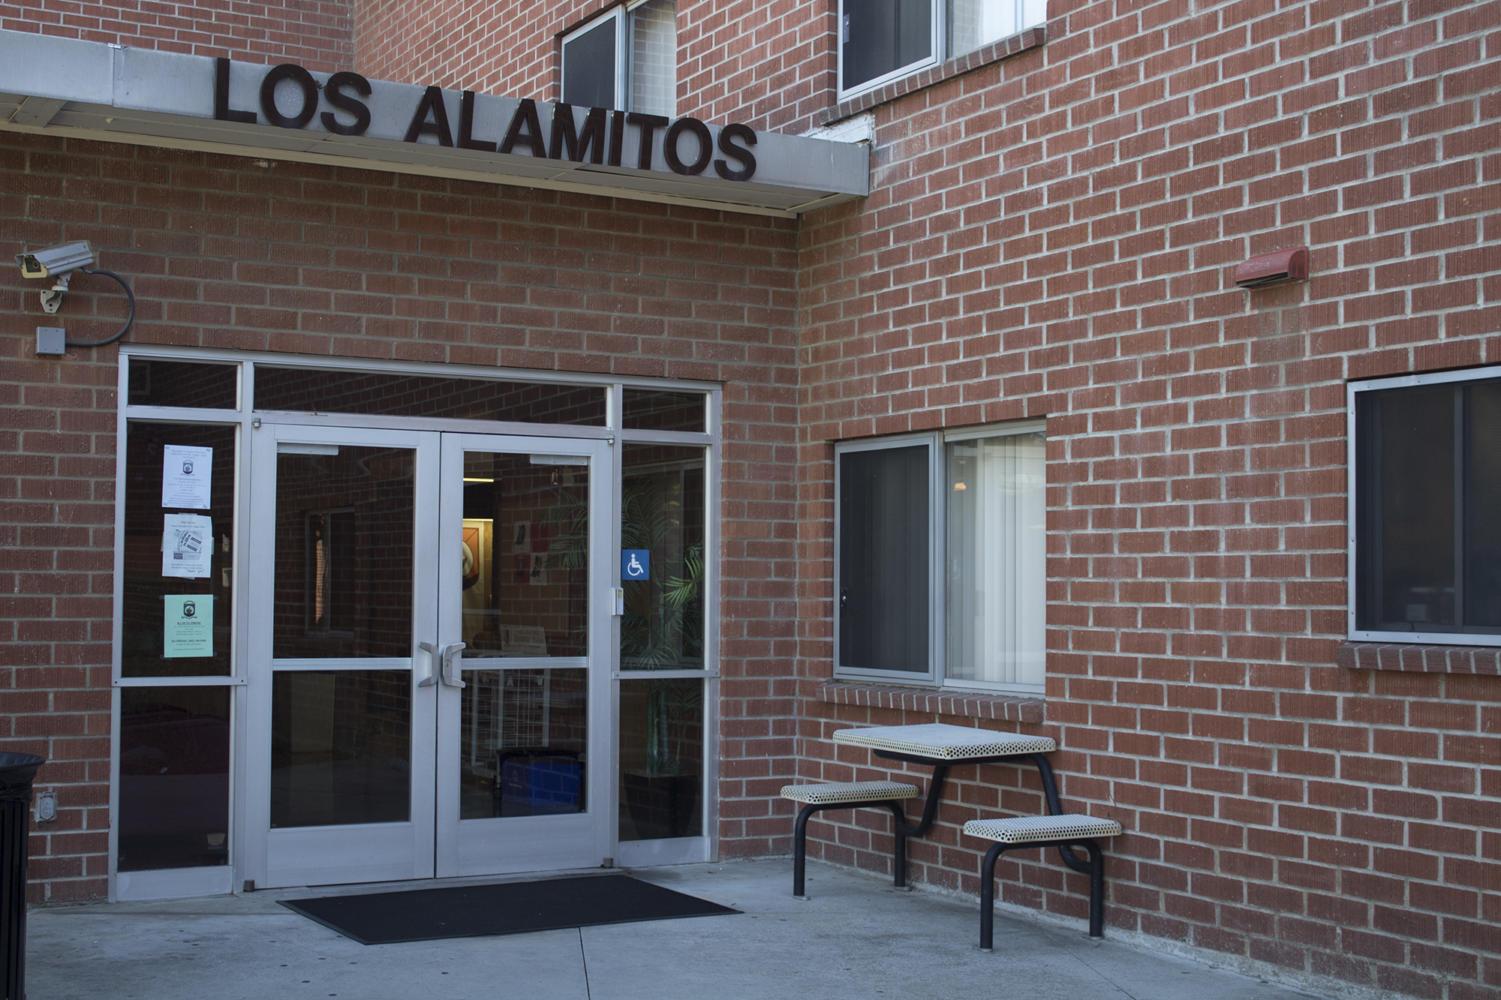 Rodent have made the walls of the Los Alamitos on campus dorms their home this semester, according to student housing faculty.